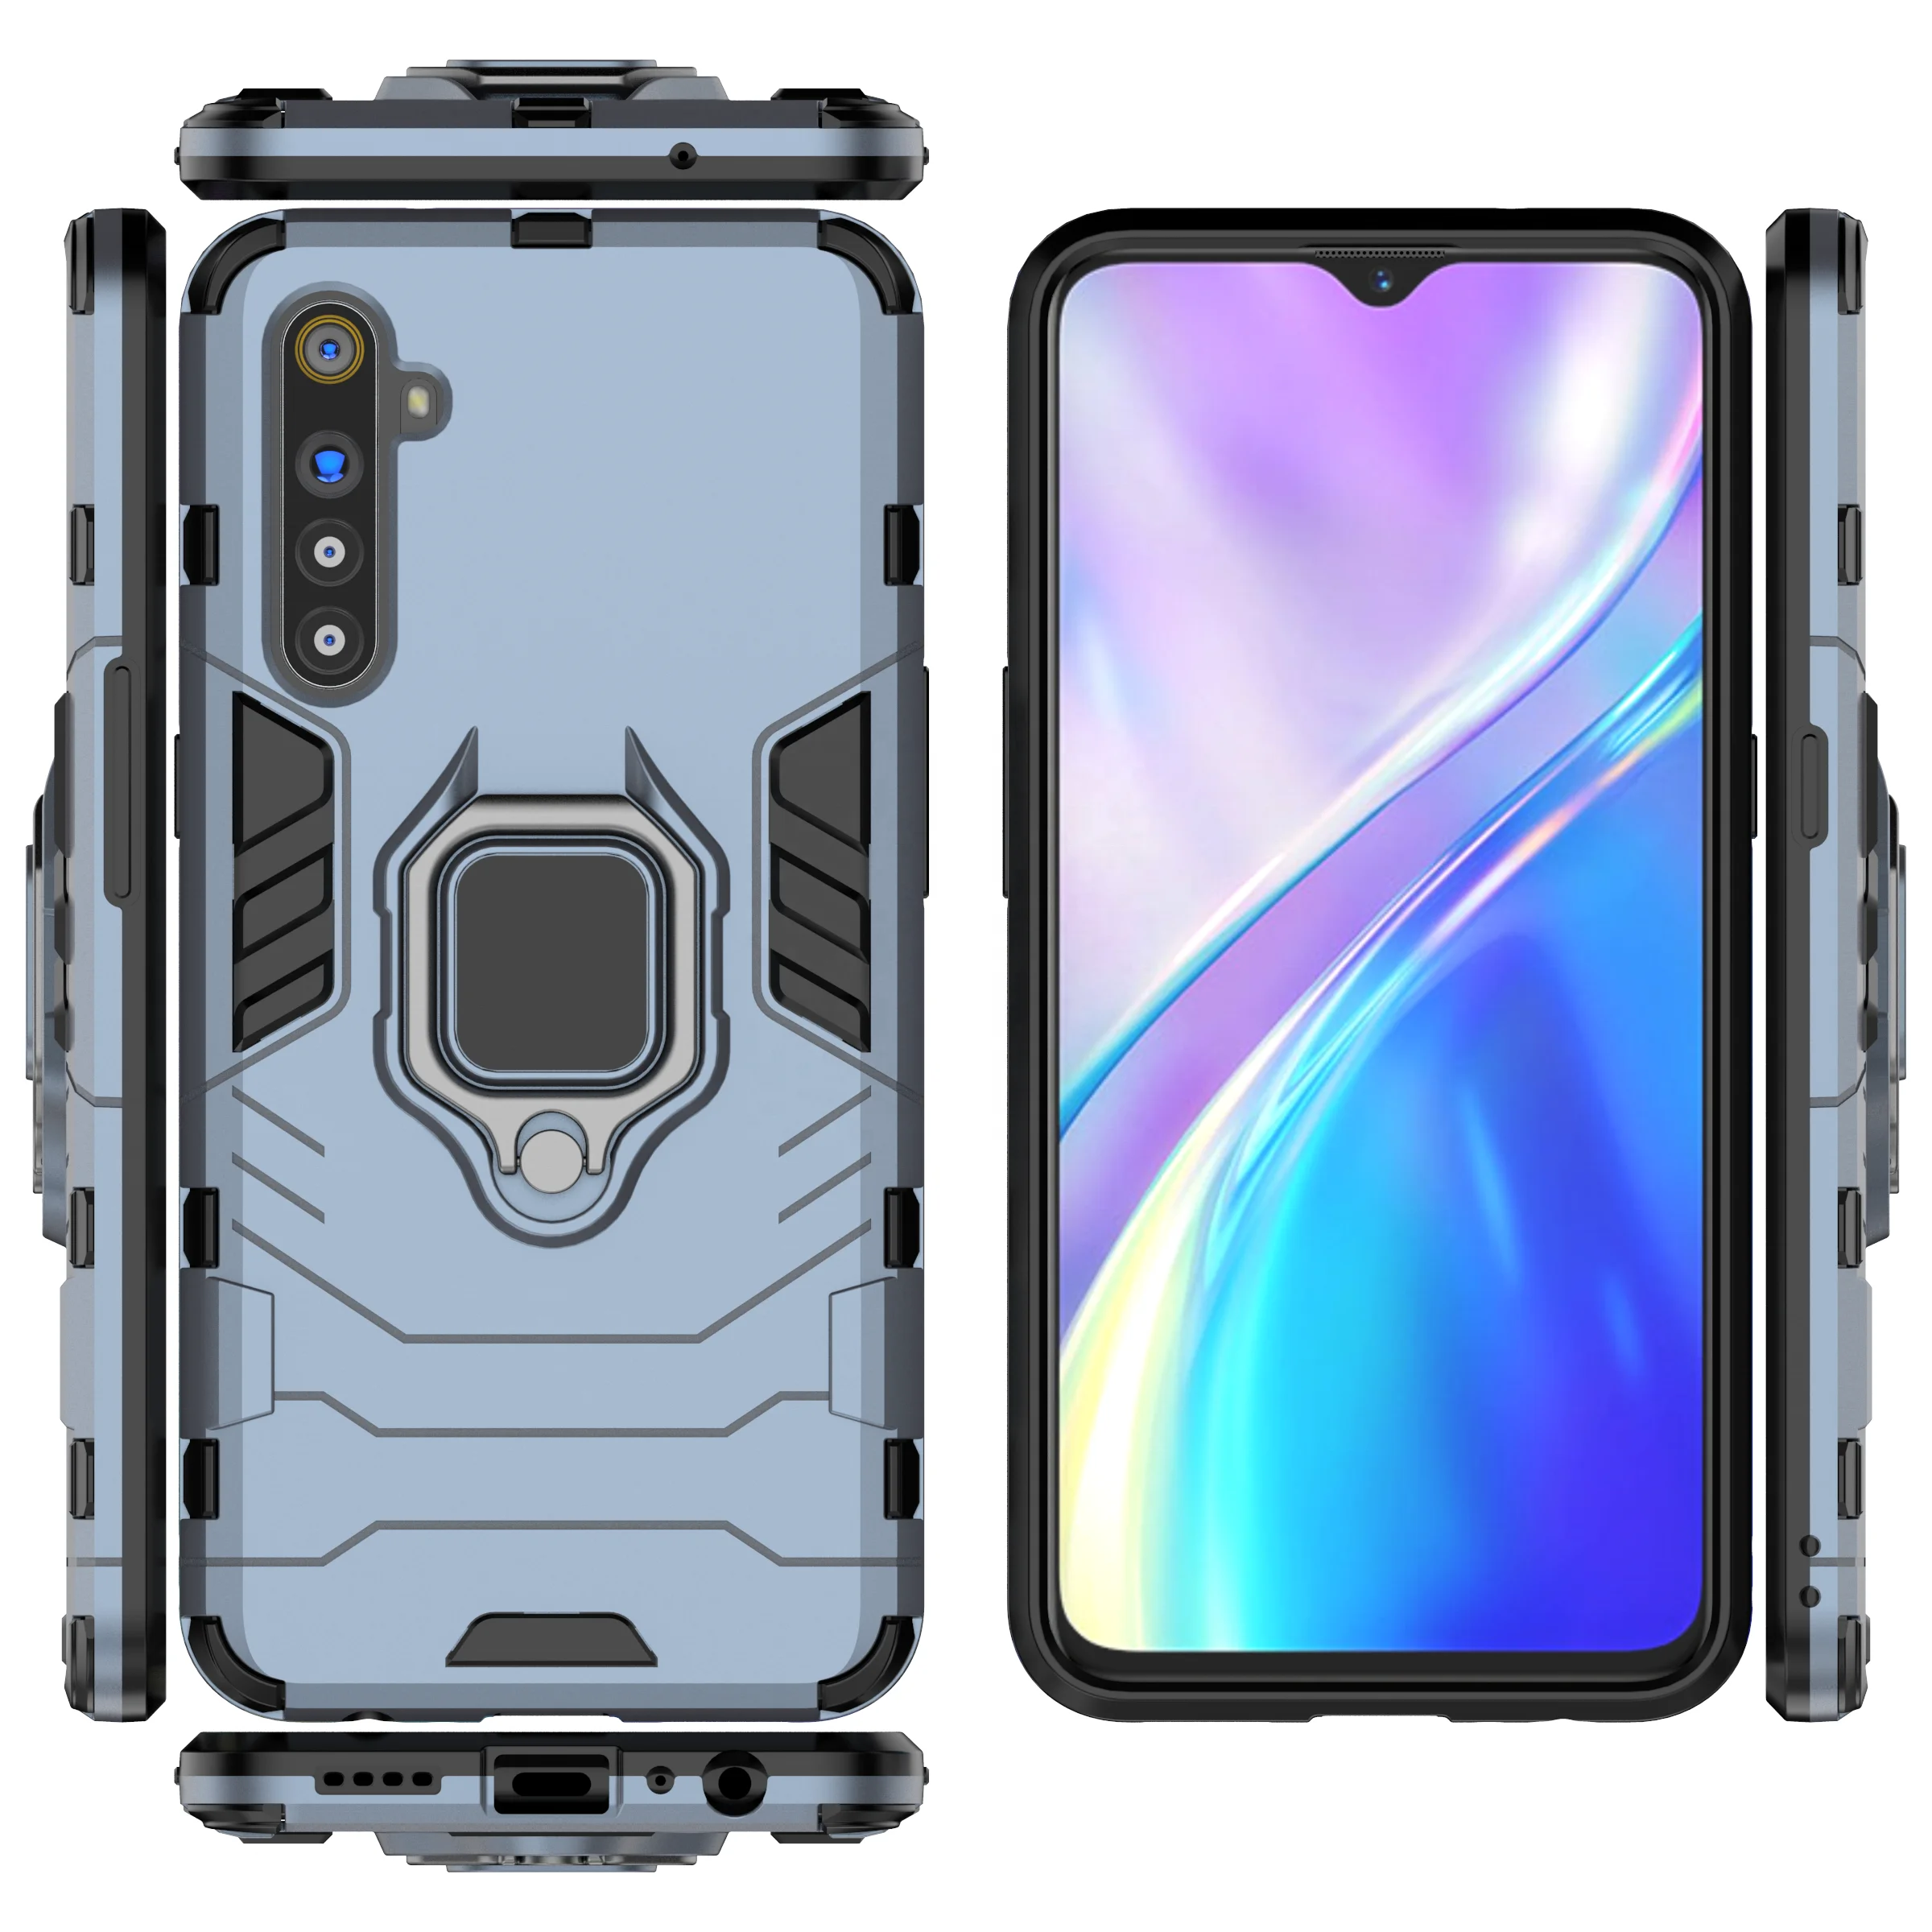 

2020 2 in 1 Hybrid Phone case 360 Protection Back Cover Case For Oppo realme XT, Multi-color, can be customized